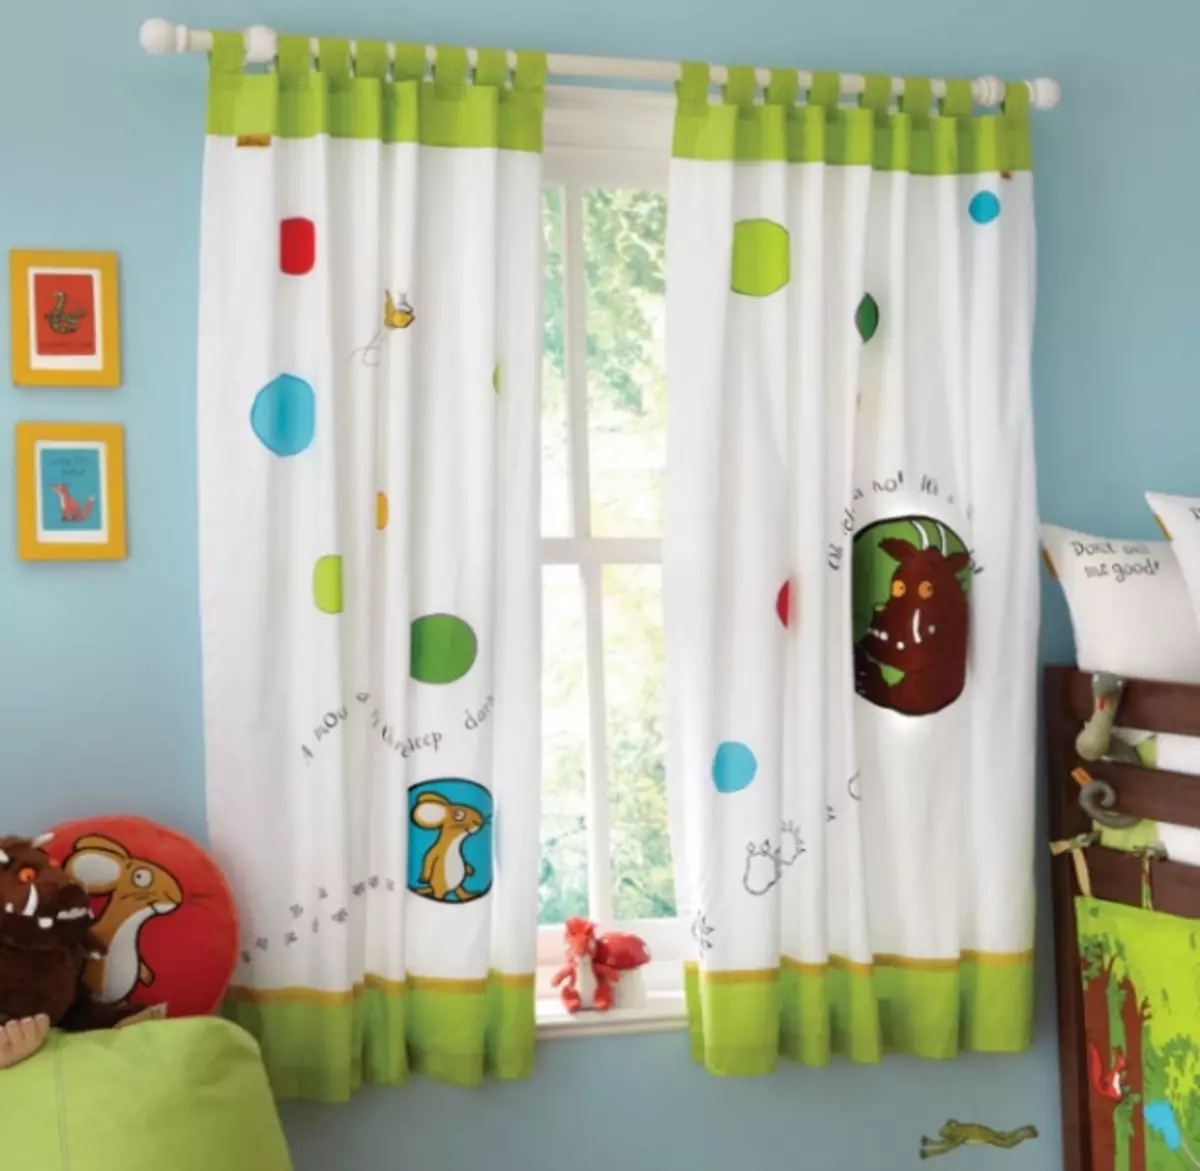 How to sew a cloth in the children's room yourself - the fastest way